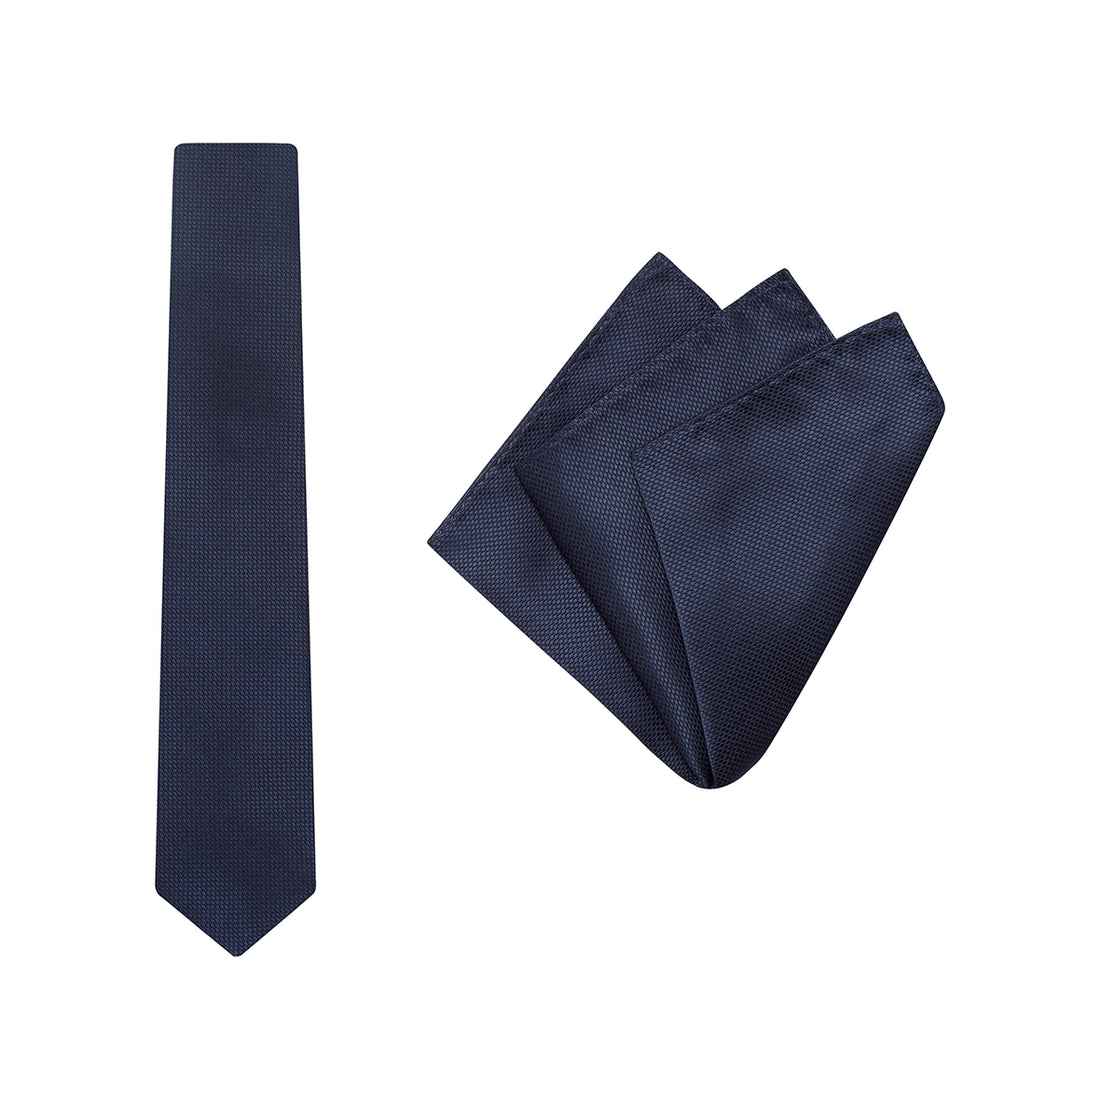 TIE + POCKET SQUARE SET. Wedding. Navy. Supplied with matching pocket square.-Ties-PEROZ Accessories